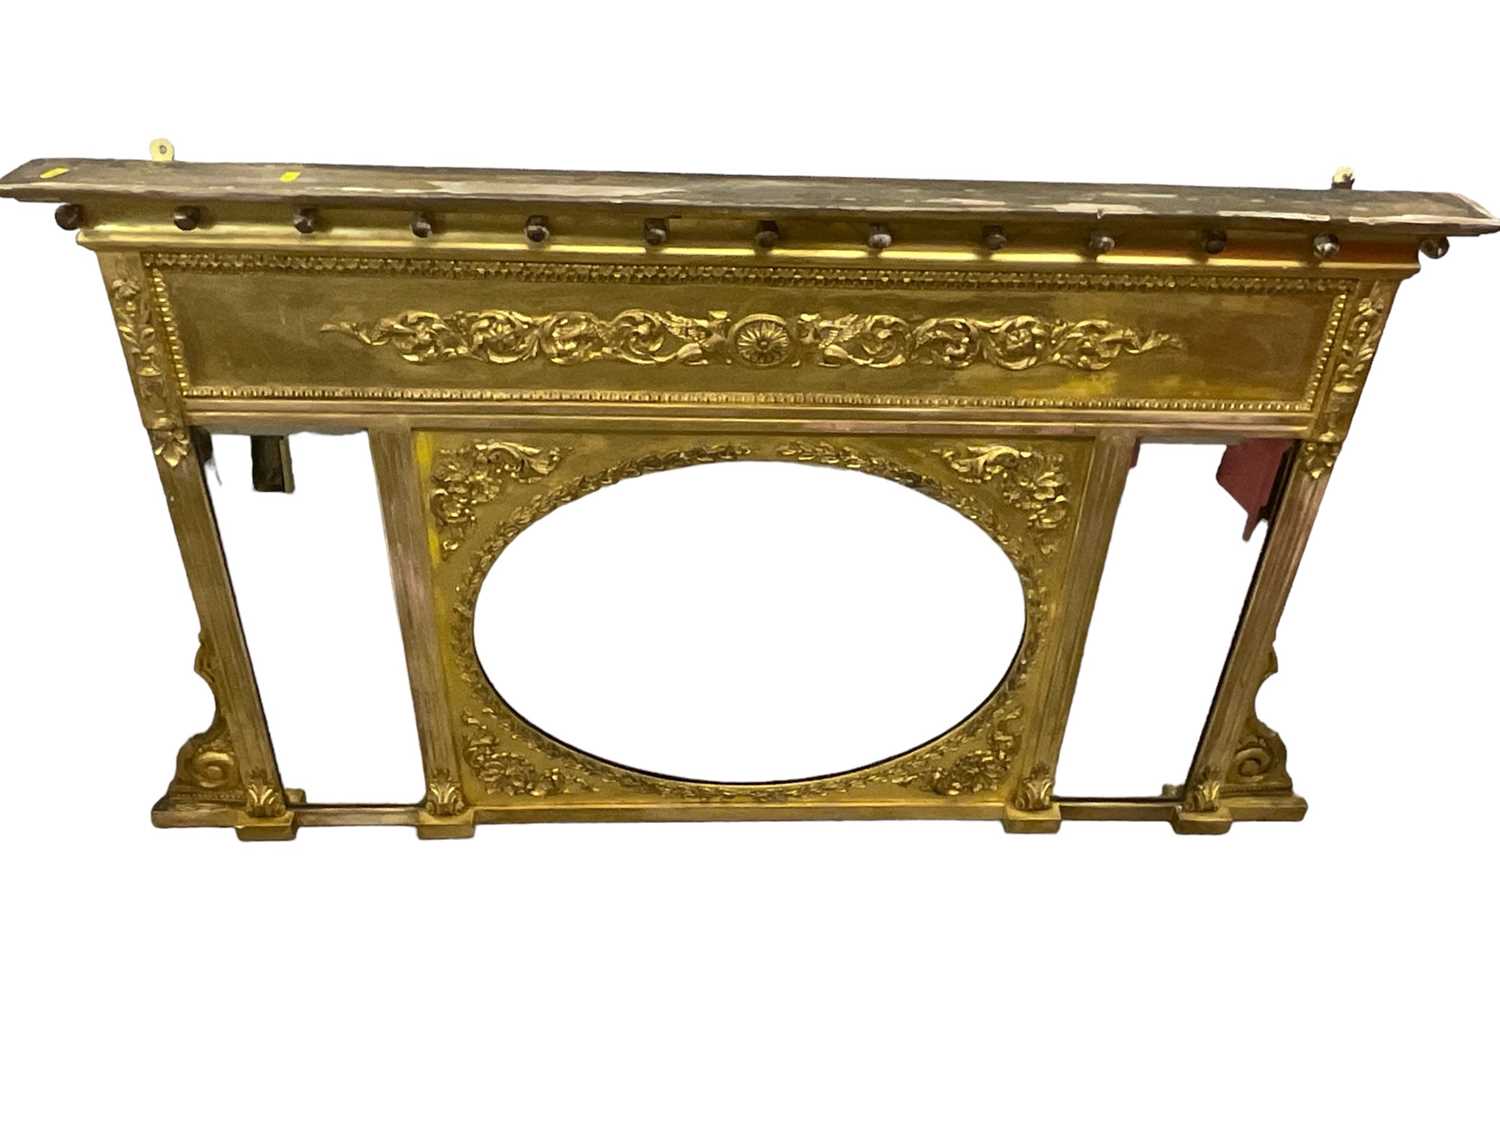 Early 19th century overmantel mirror in gilt frame